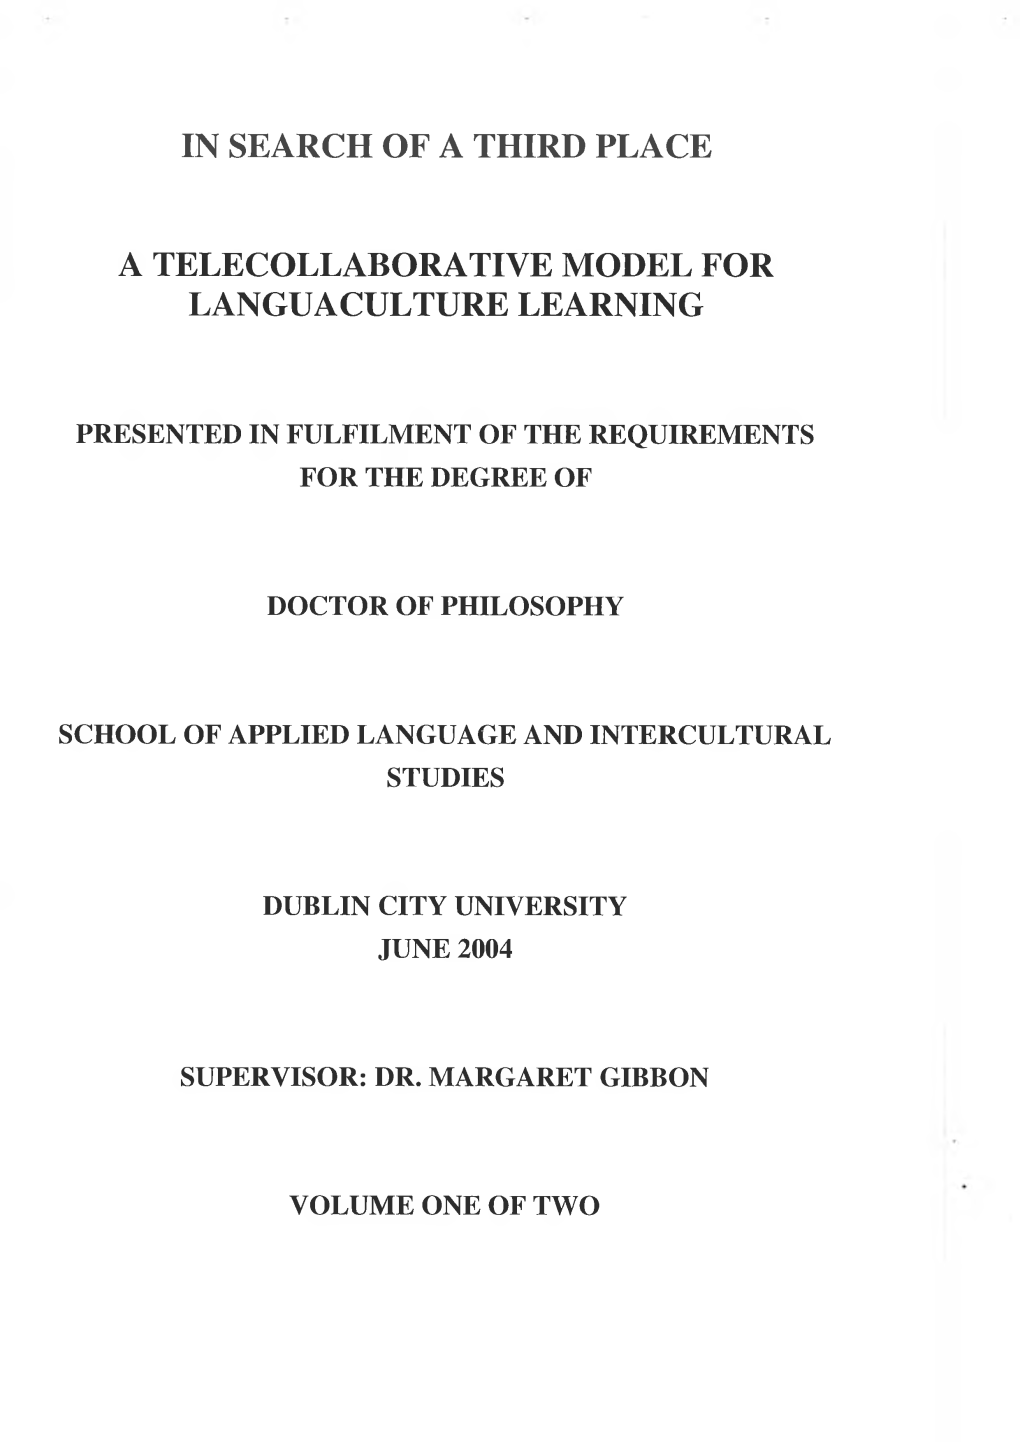 In Search of a Third Place a Telecollaborative Model